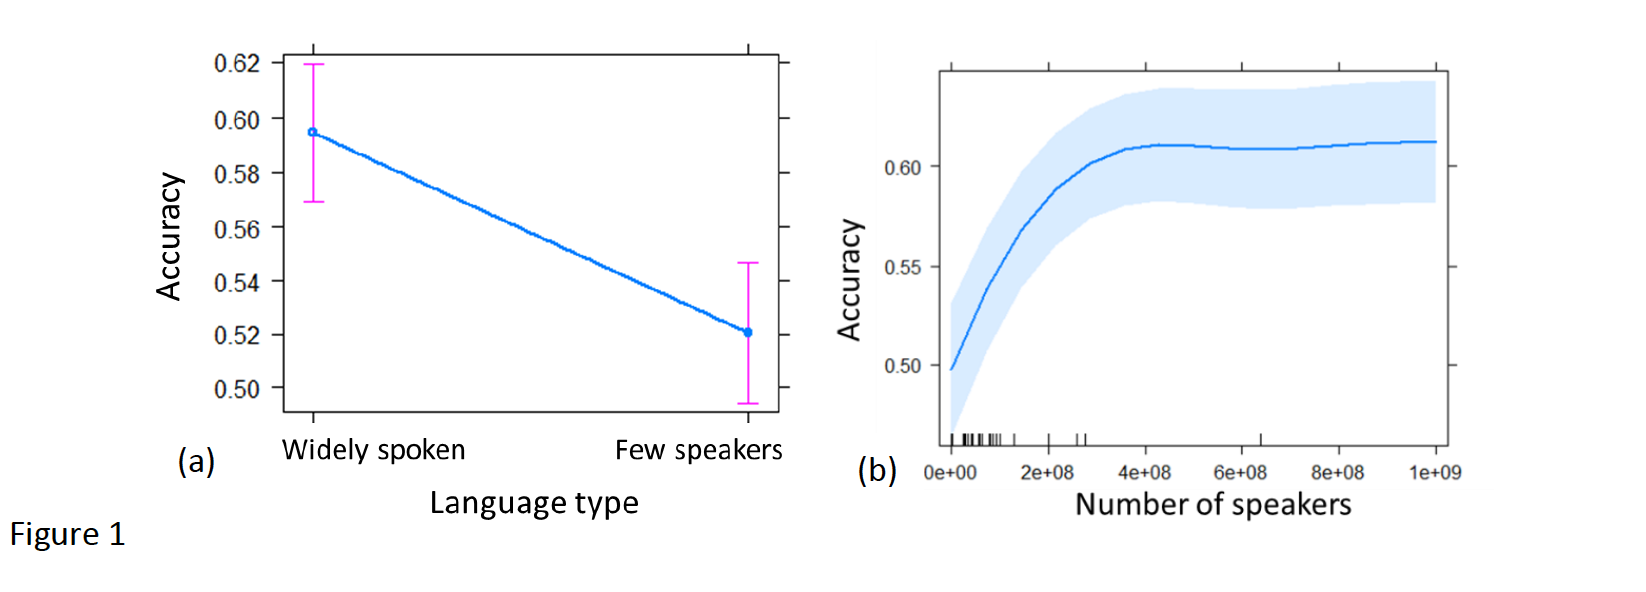 Language type / number of speakers plotted against accuracy